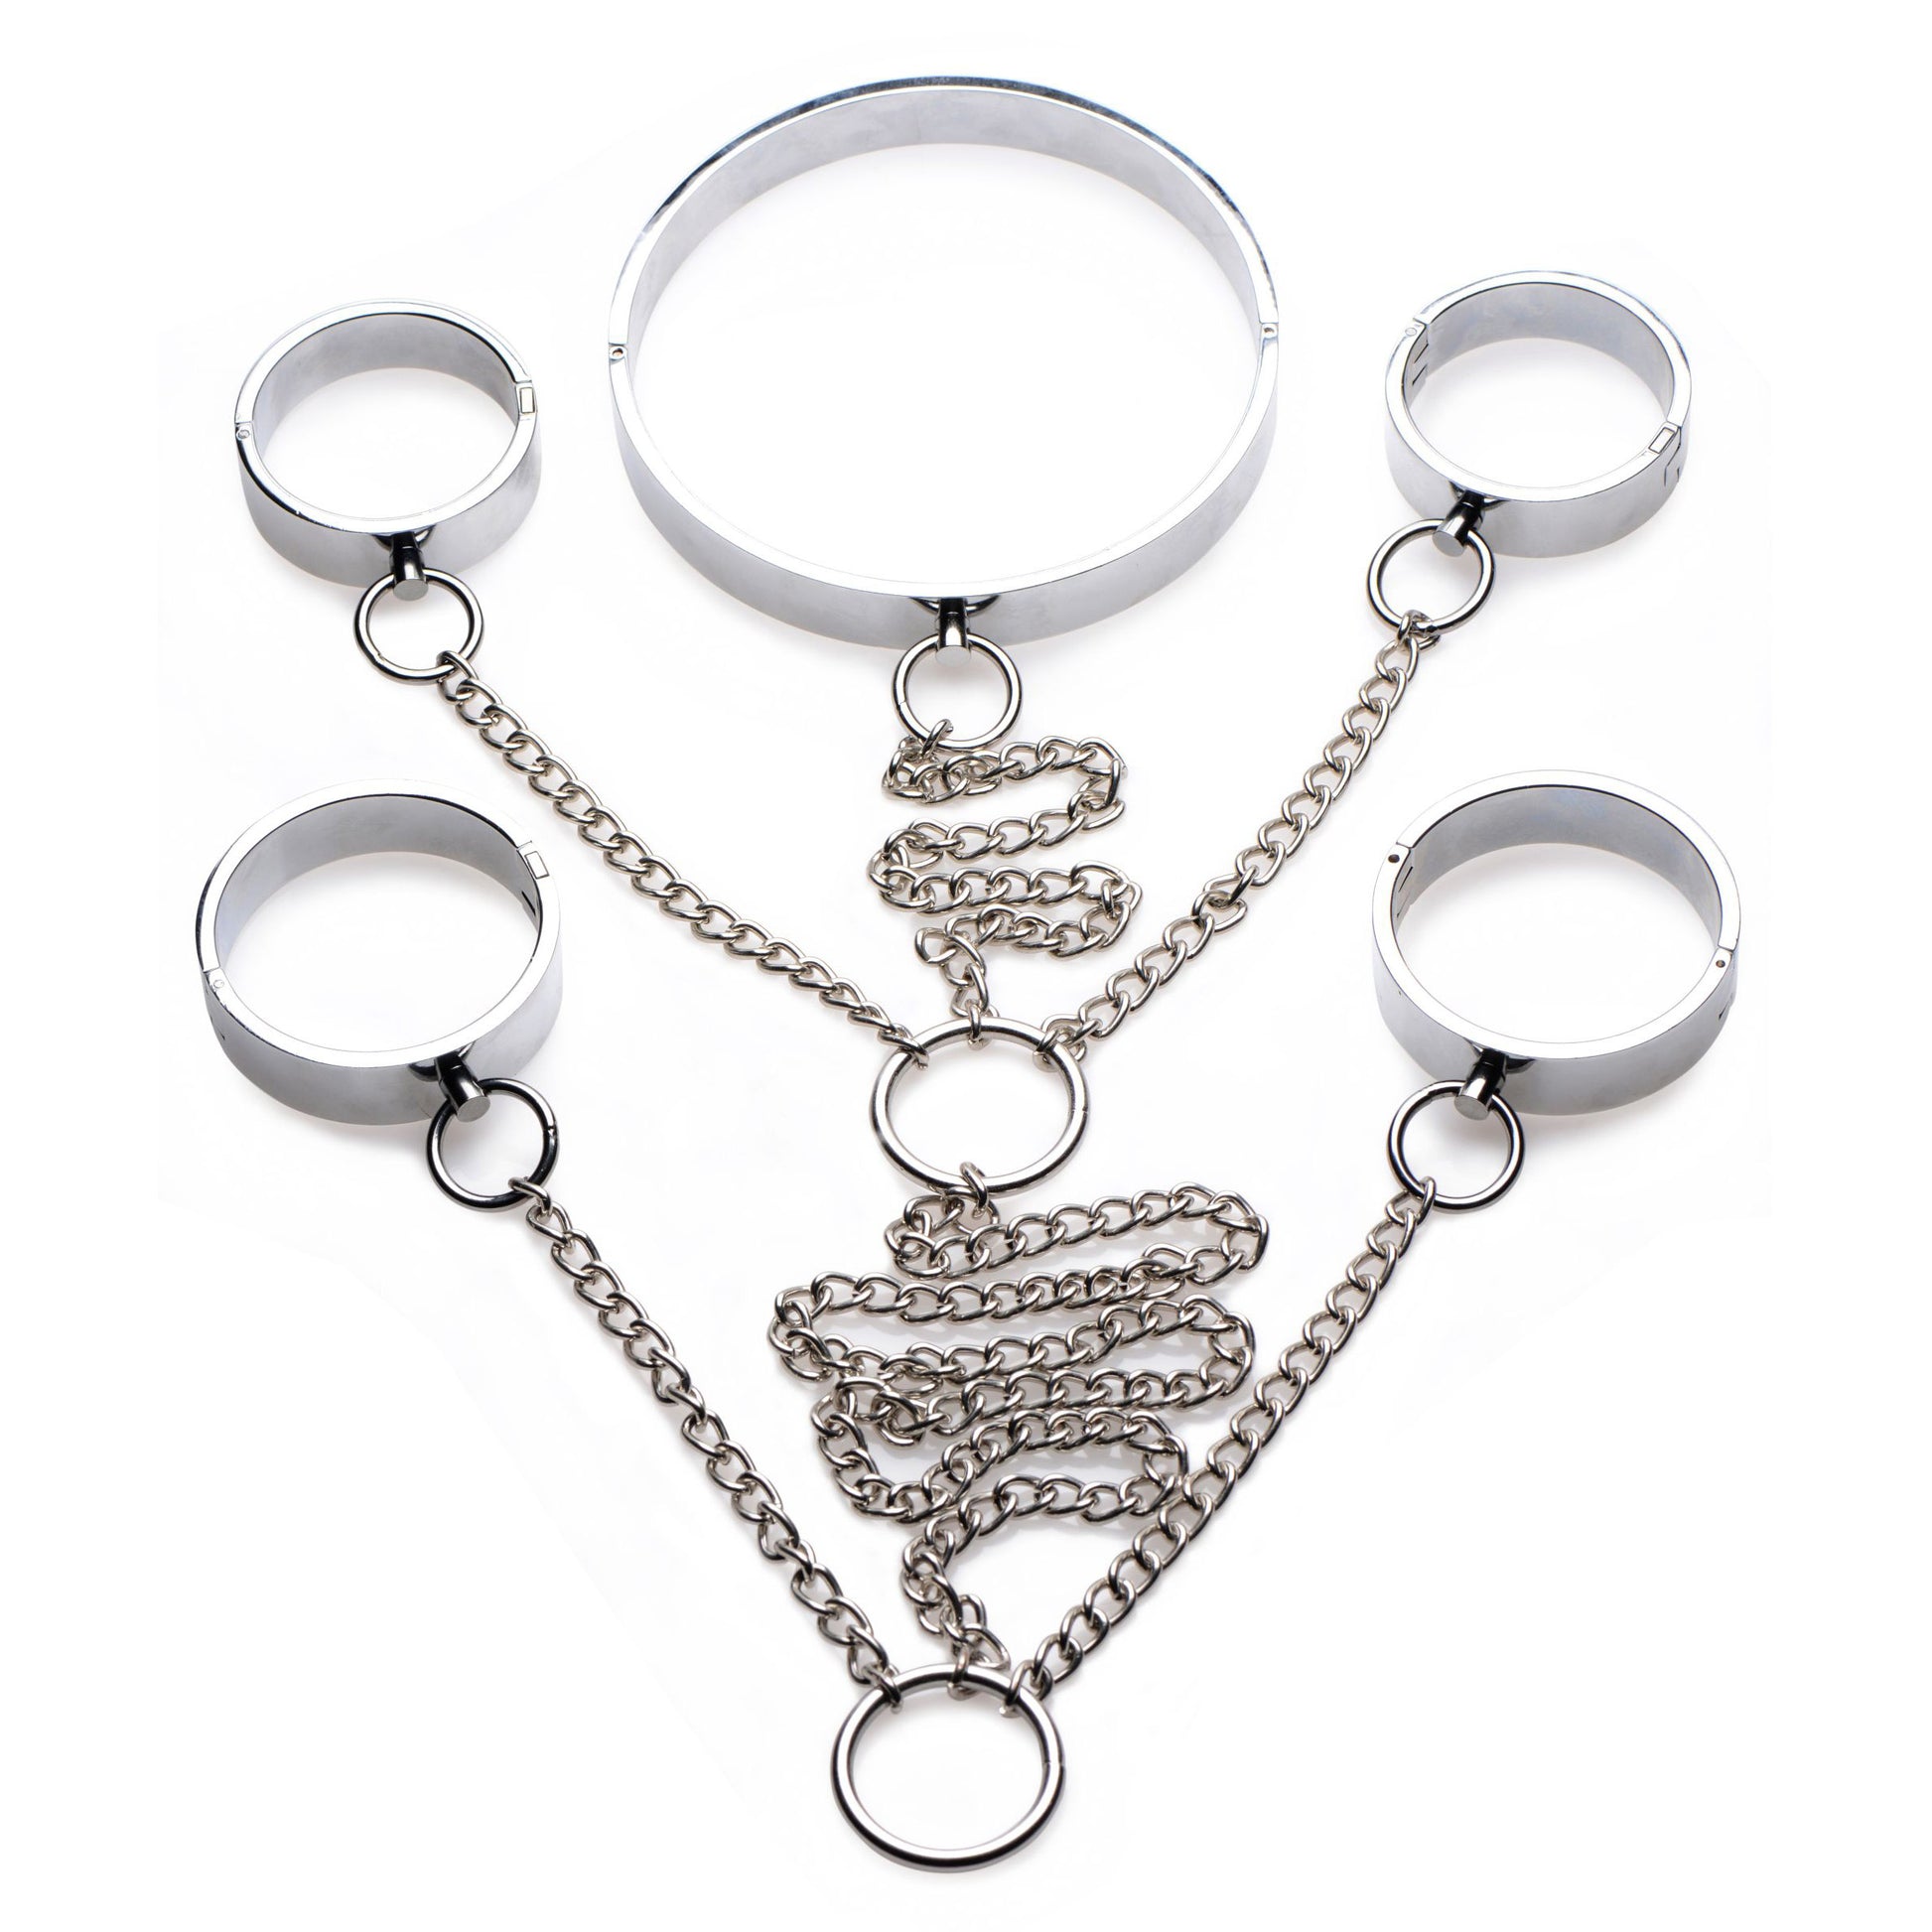 5 Piece Stainless Steel Shackle Set - Small - UABDSM